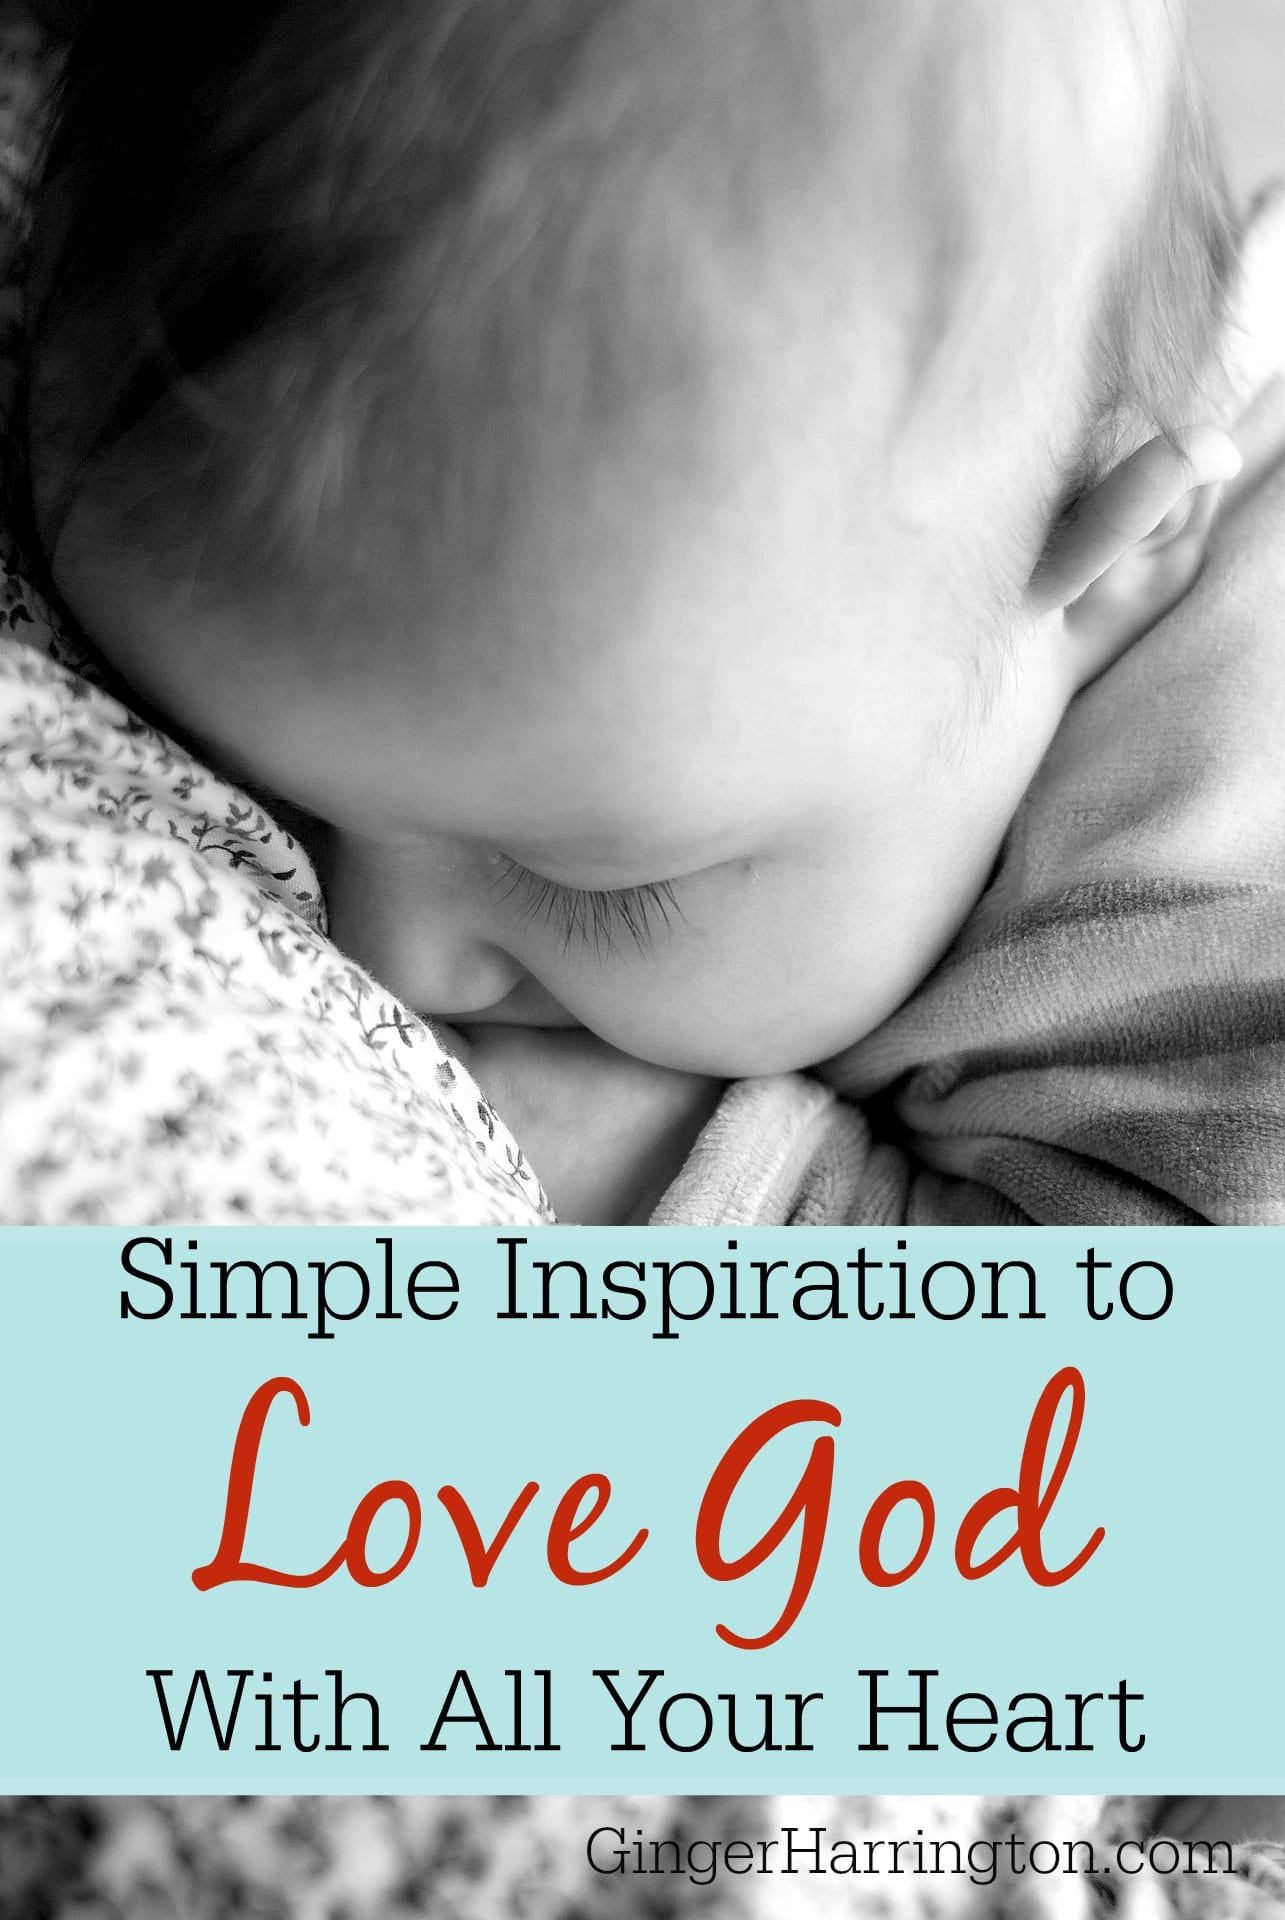 Simple Inspiration to Love God with All Your Heart